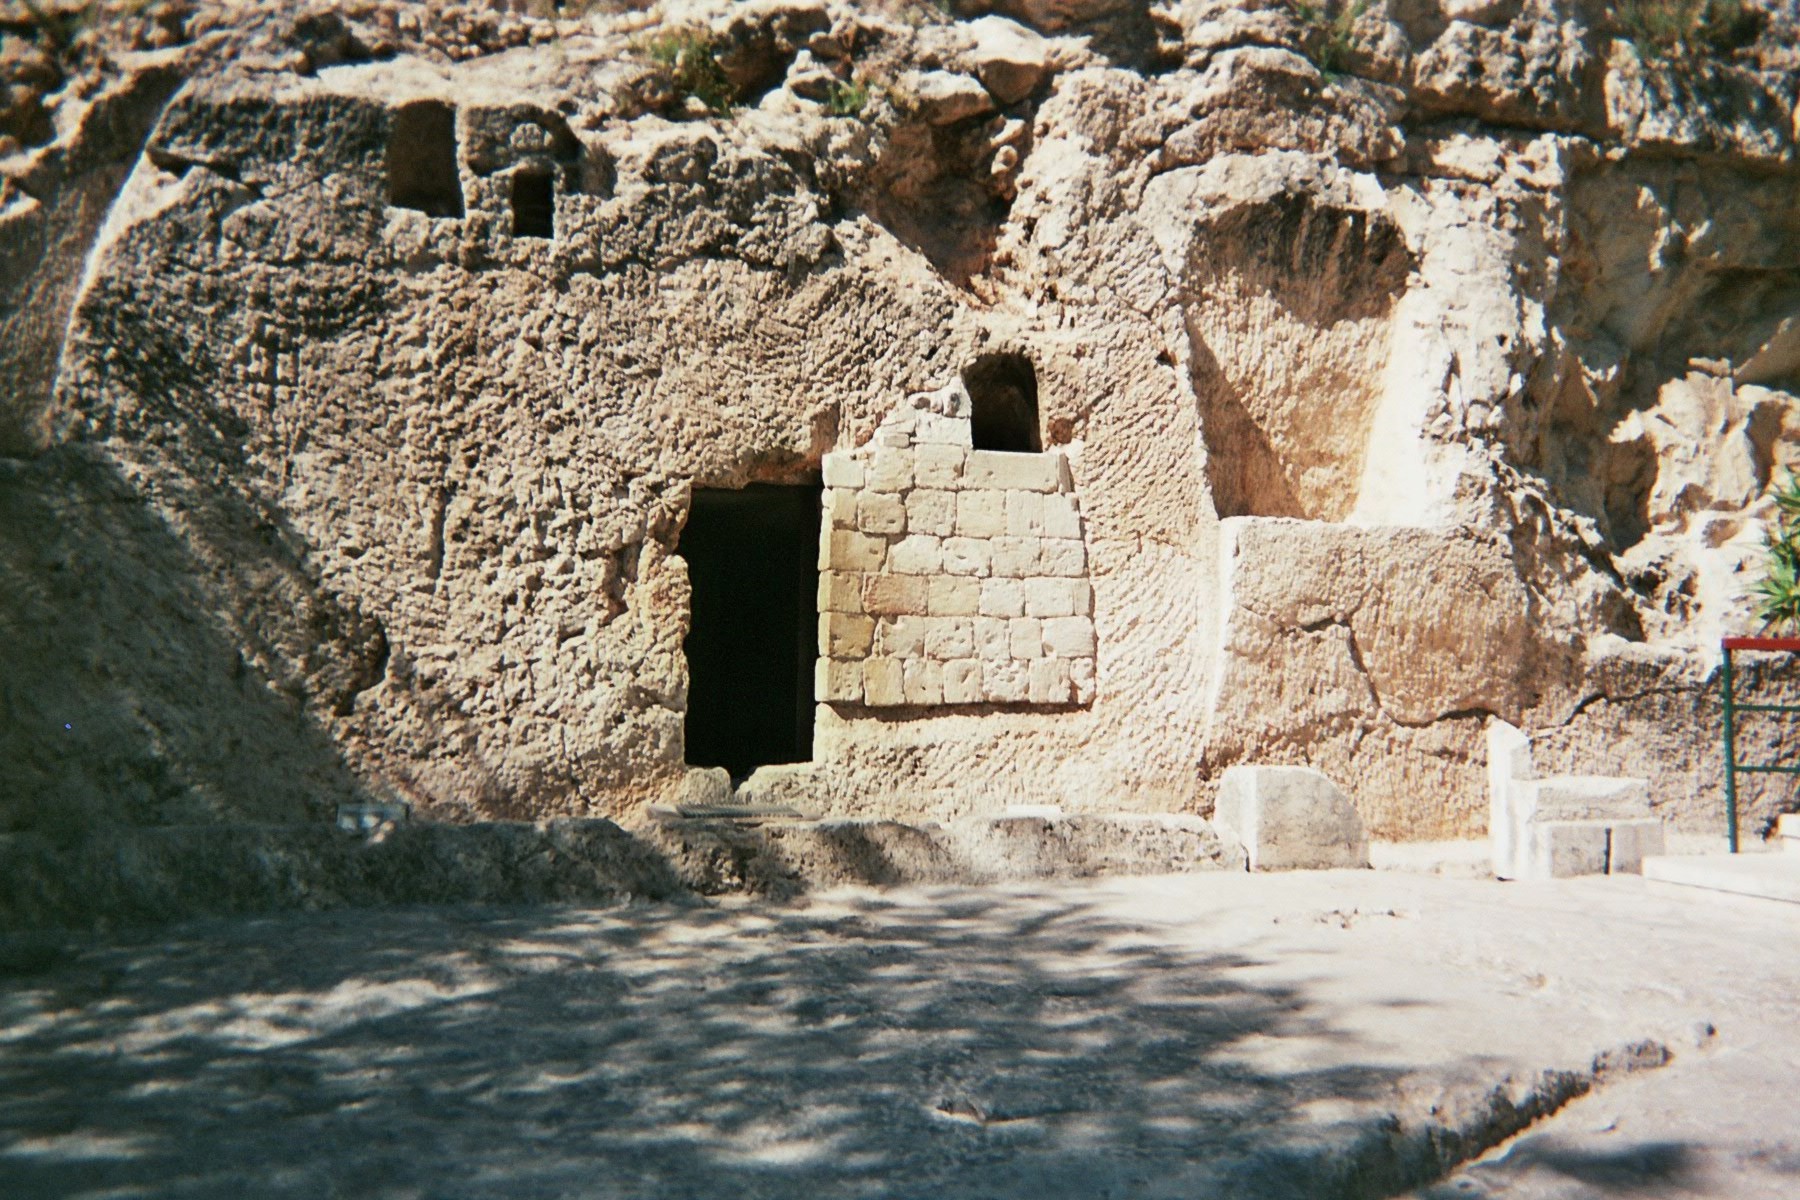 Tomb that might resemble the one donated by Joseph of Arimathea.